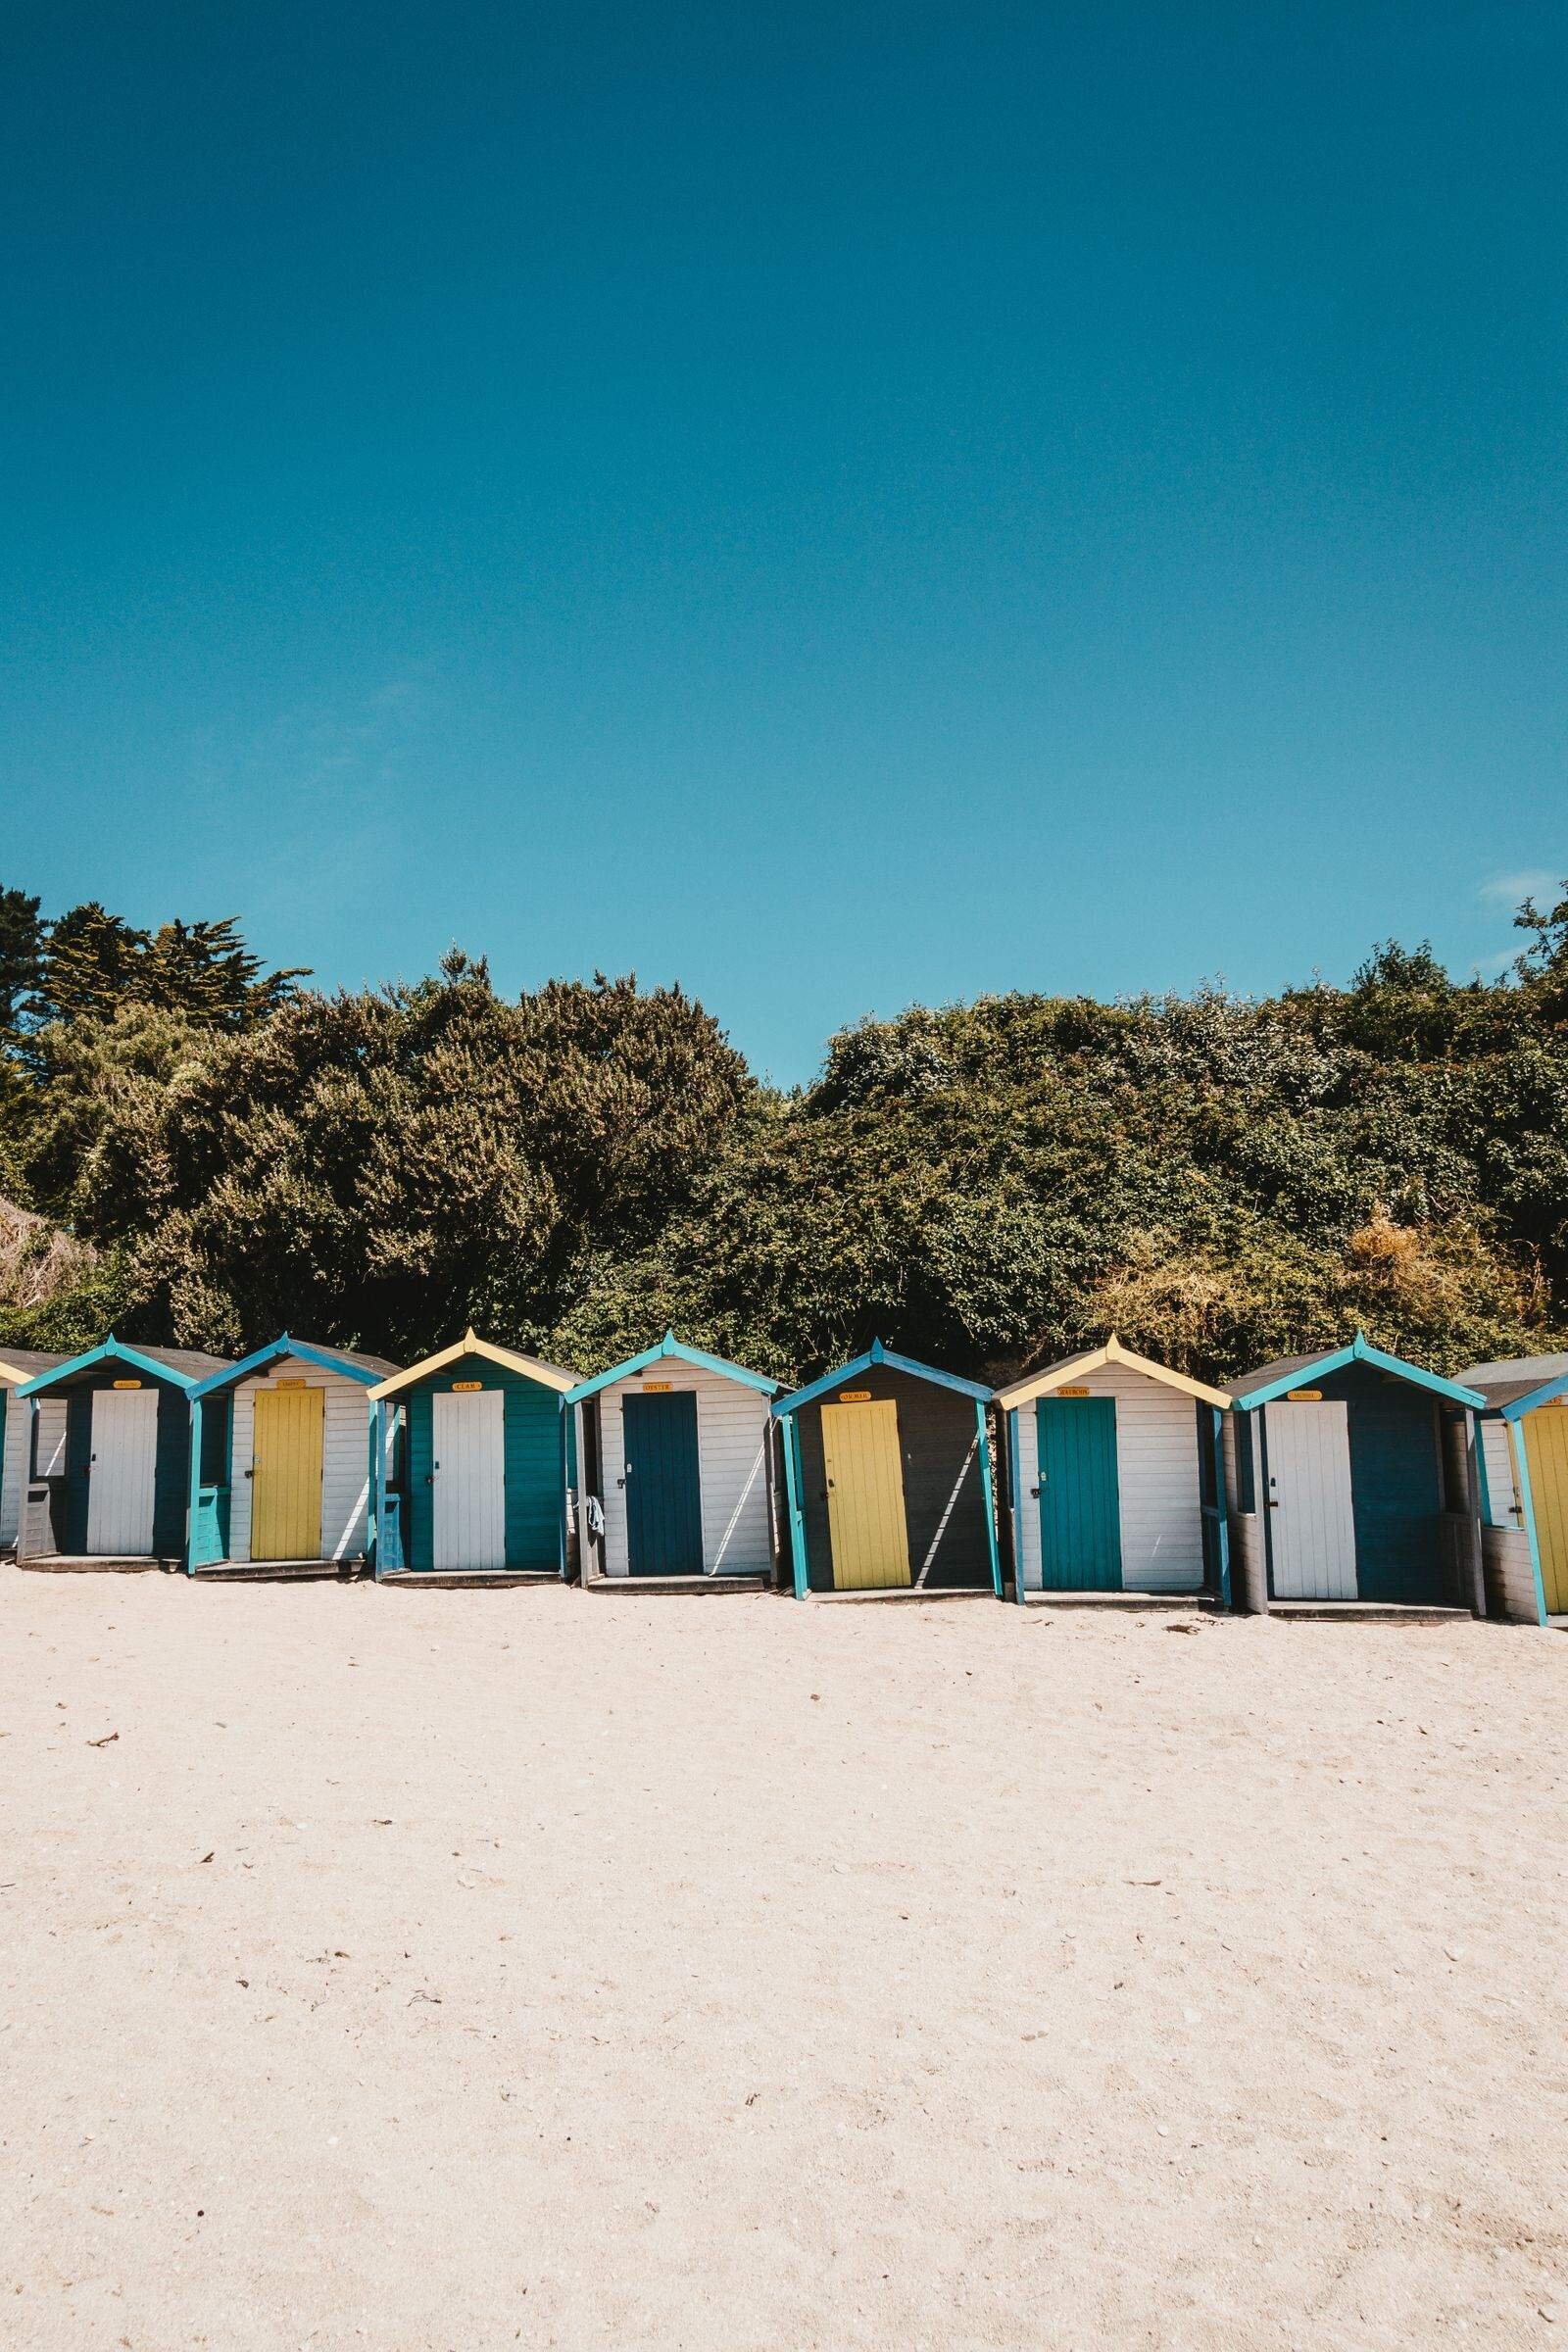 Swanpool beach huts in Falmouth - Photo by Gordon Plant on Unsplash